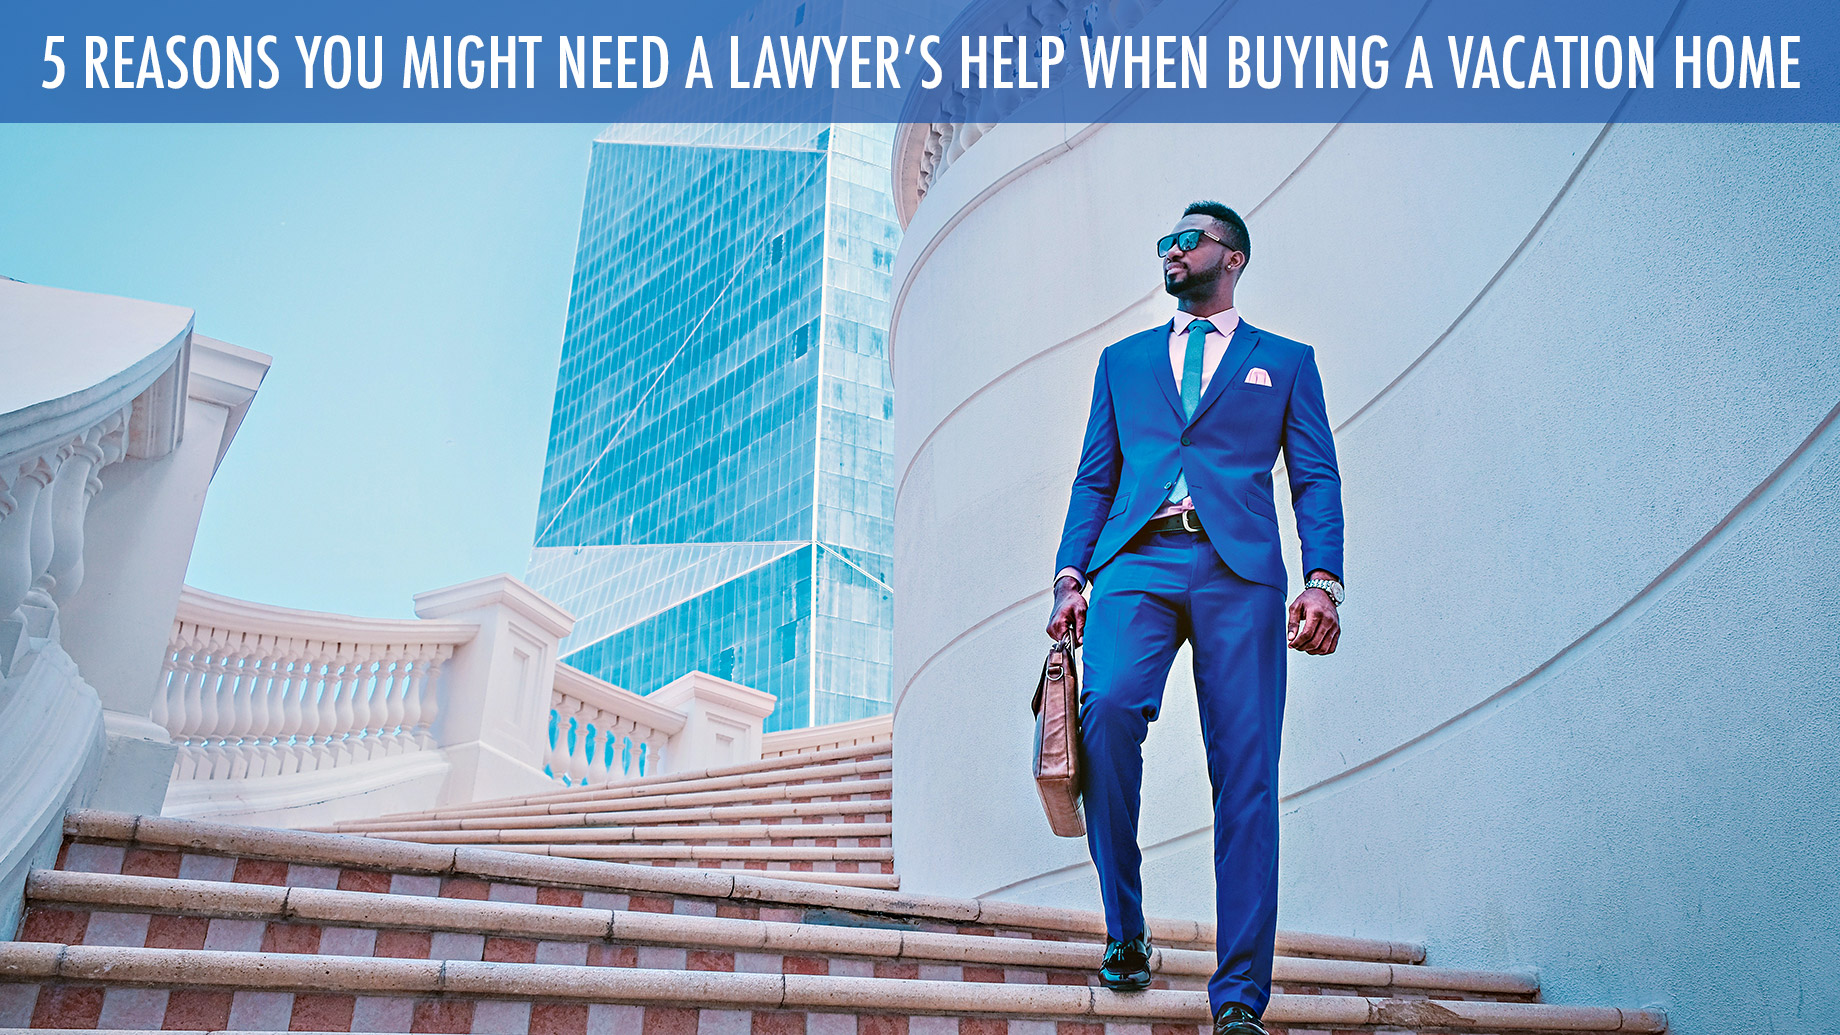 5 Reasons You Might Need a Lawyer’s Help When Buying a Vacation Home